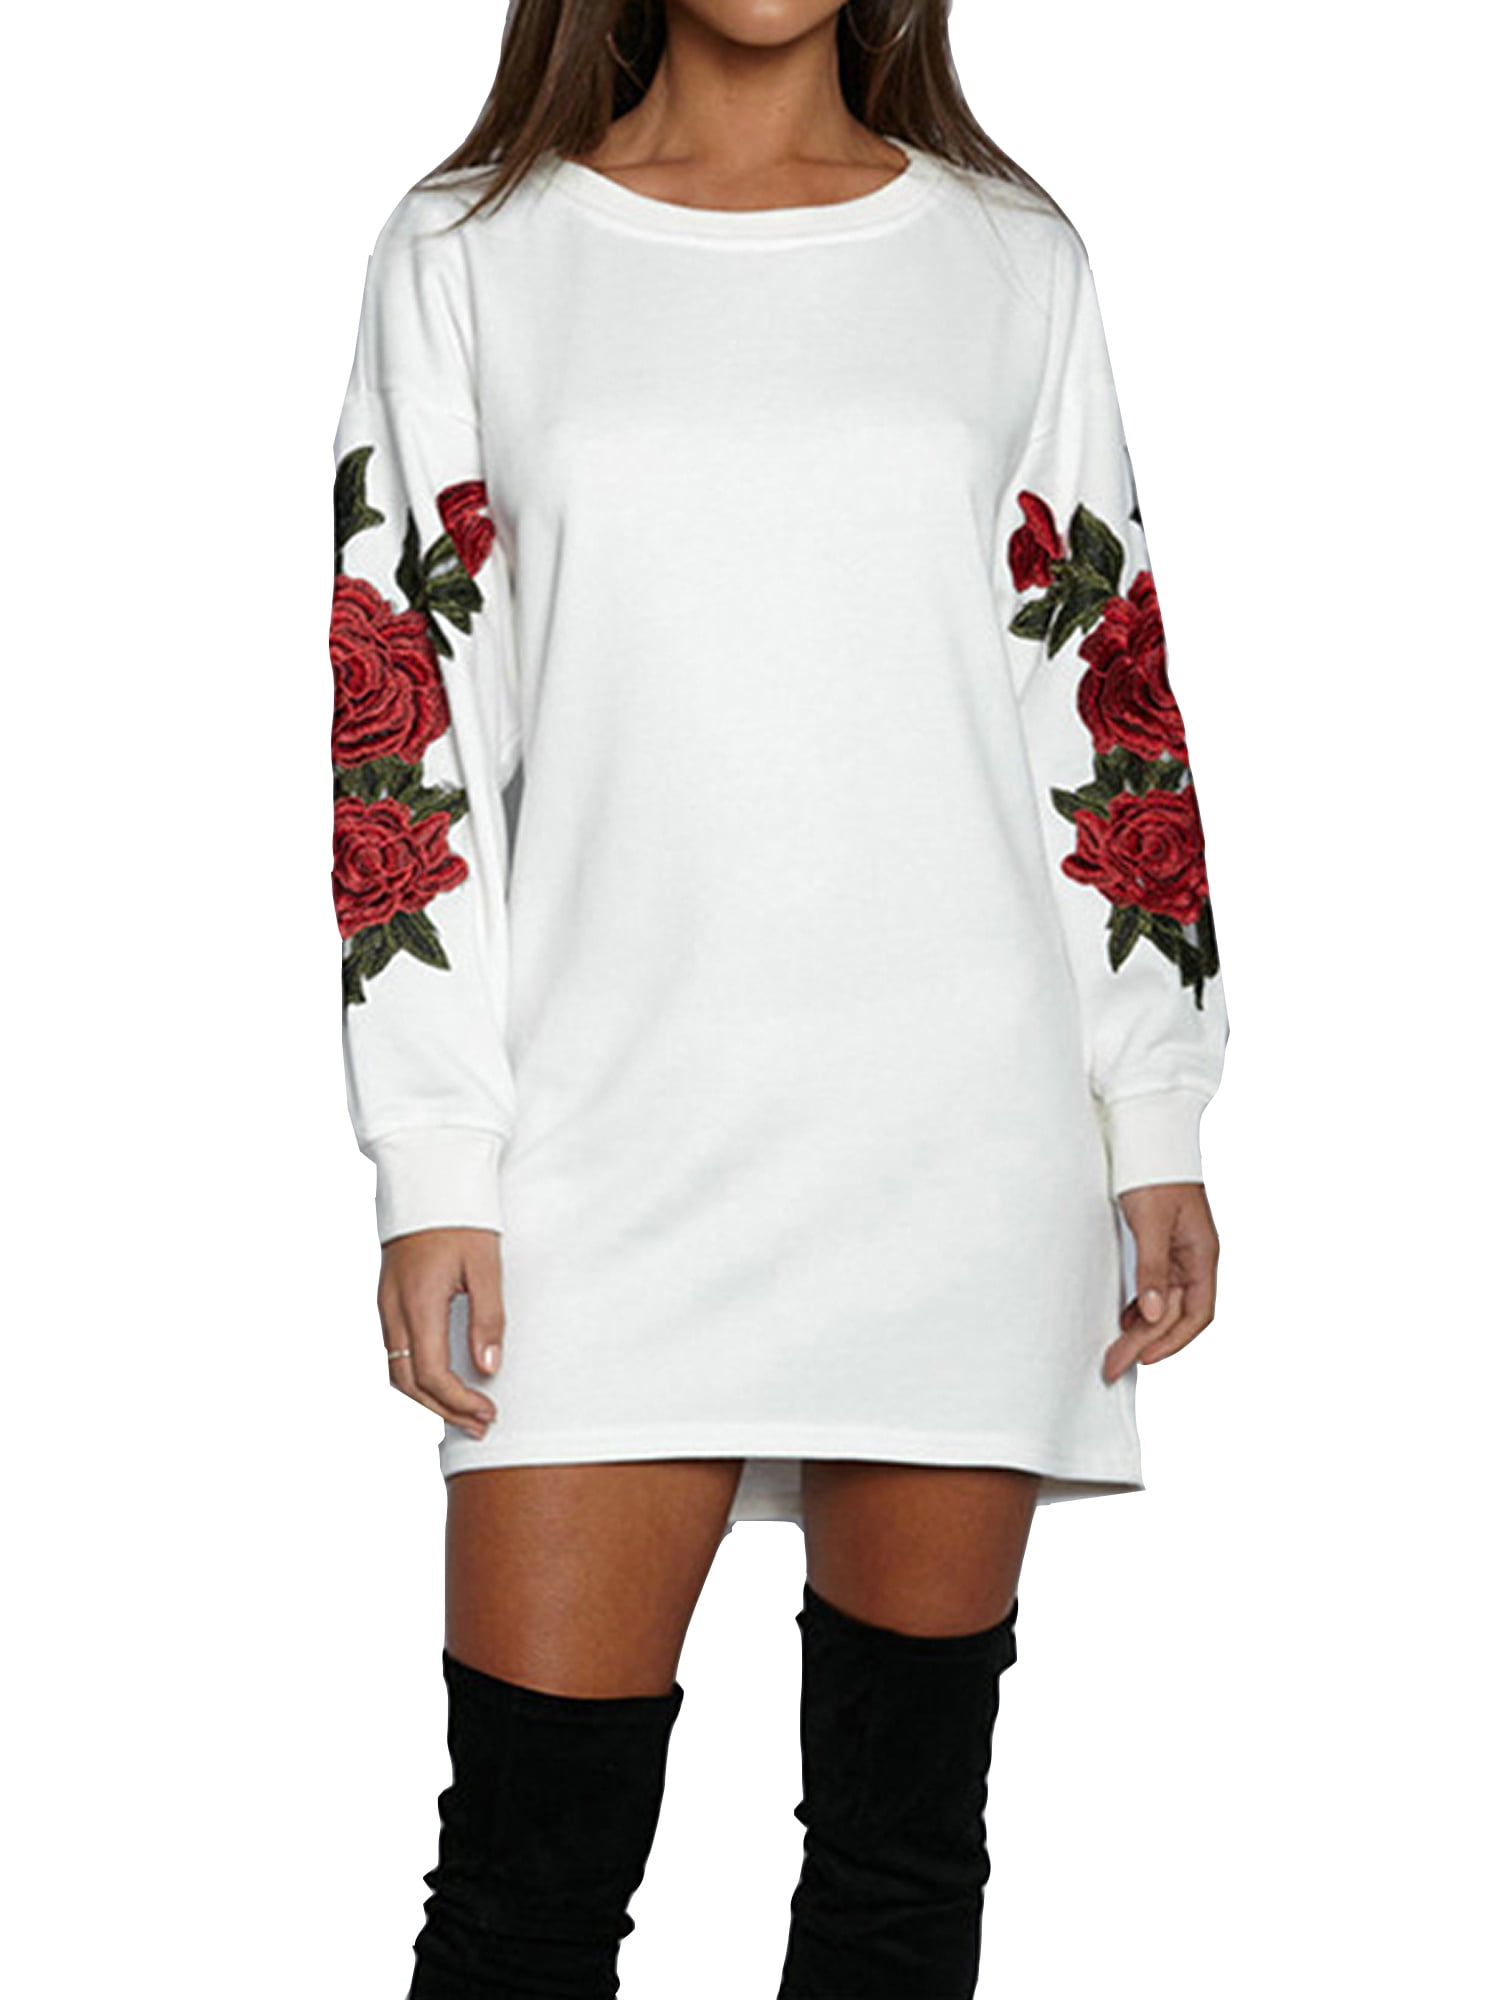 FP Women's New Spring Autumn Floral Embroidery long Sweatshirts Pullover Fashion